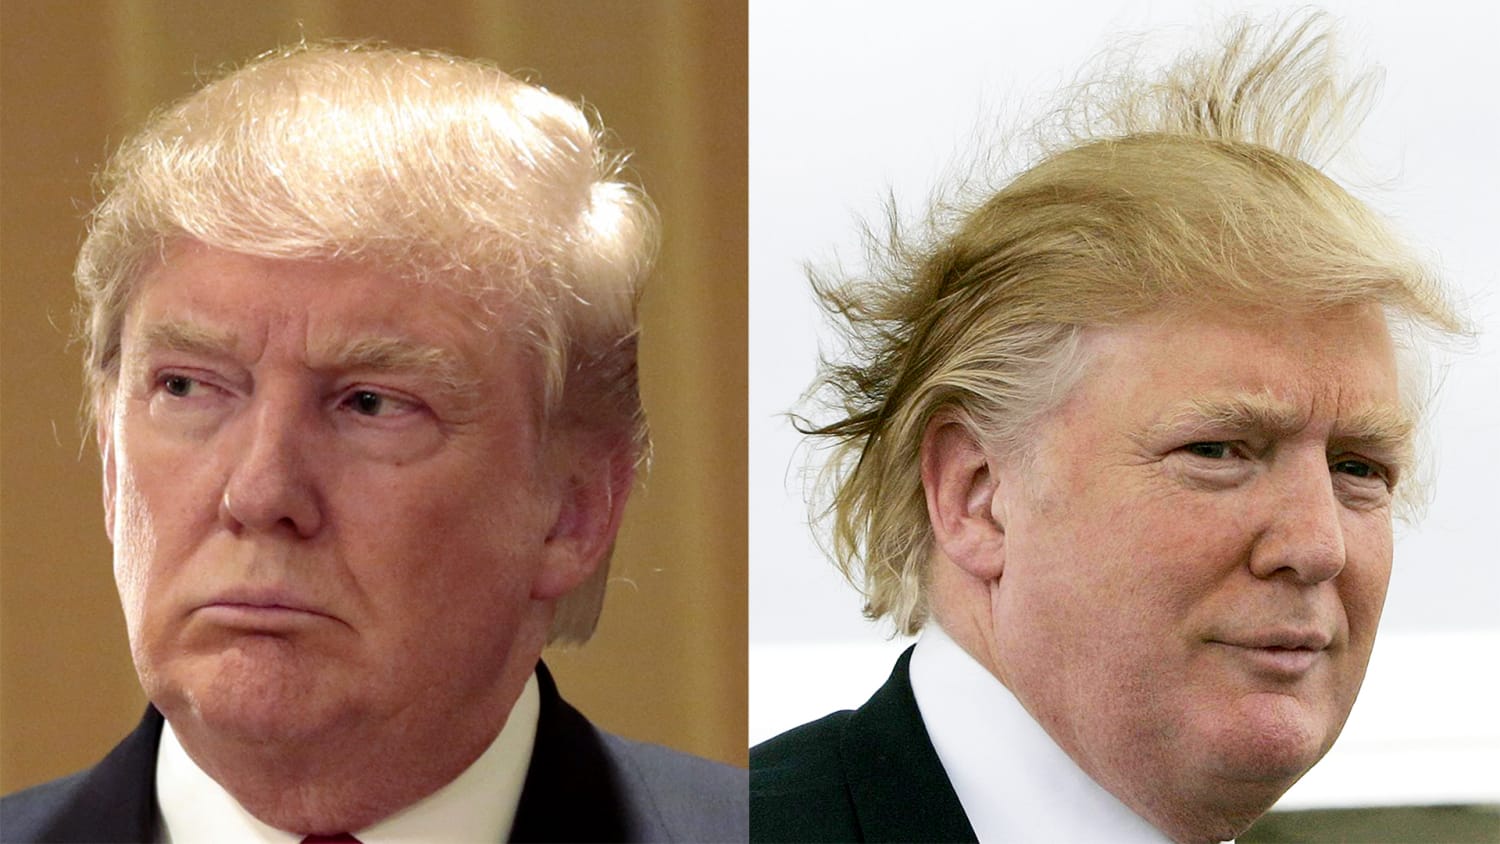 Donald Trumps Hair Defended And Explained In His Own Words